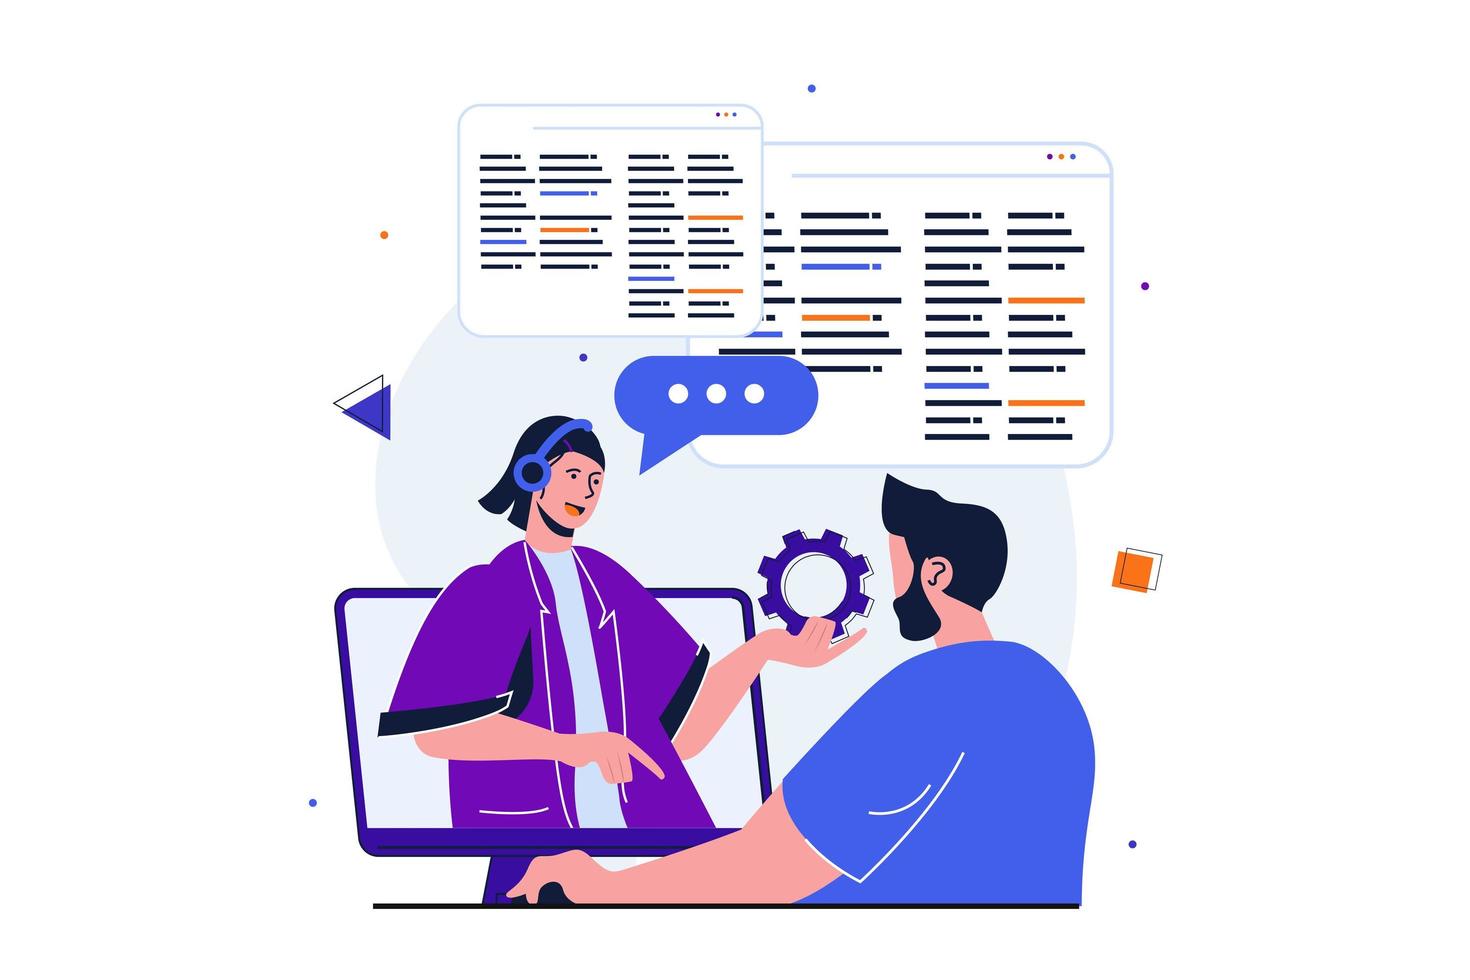 Customer service modern flat concept for web banner design. Man turned to technical support for help, personal consultant helps to solve client problem. Vector illustration with isolated people scene